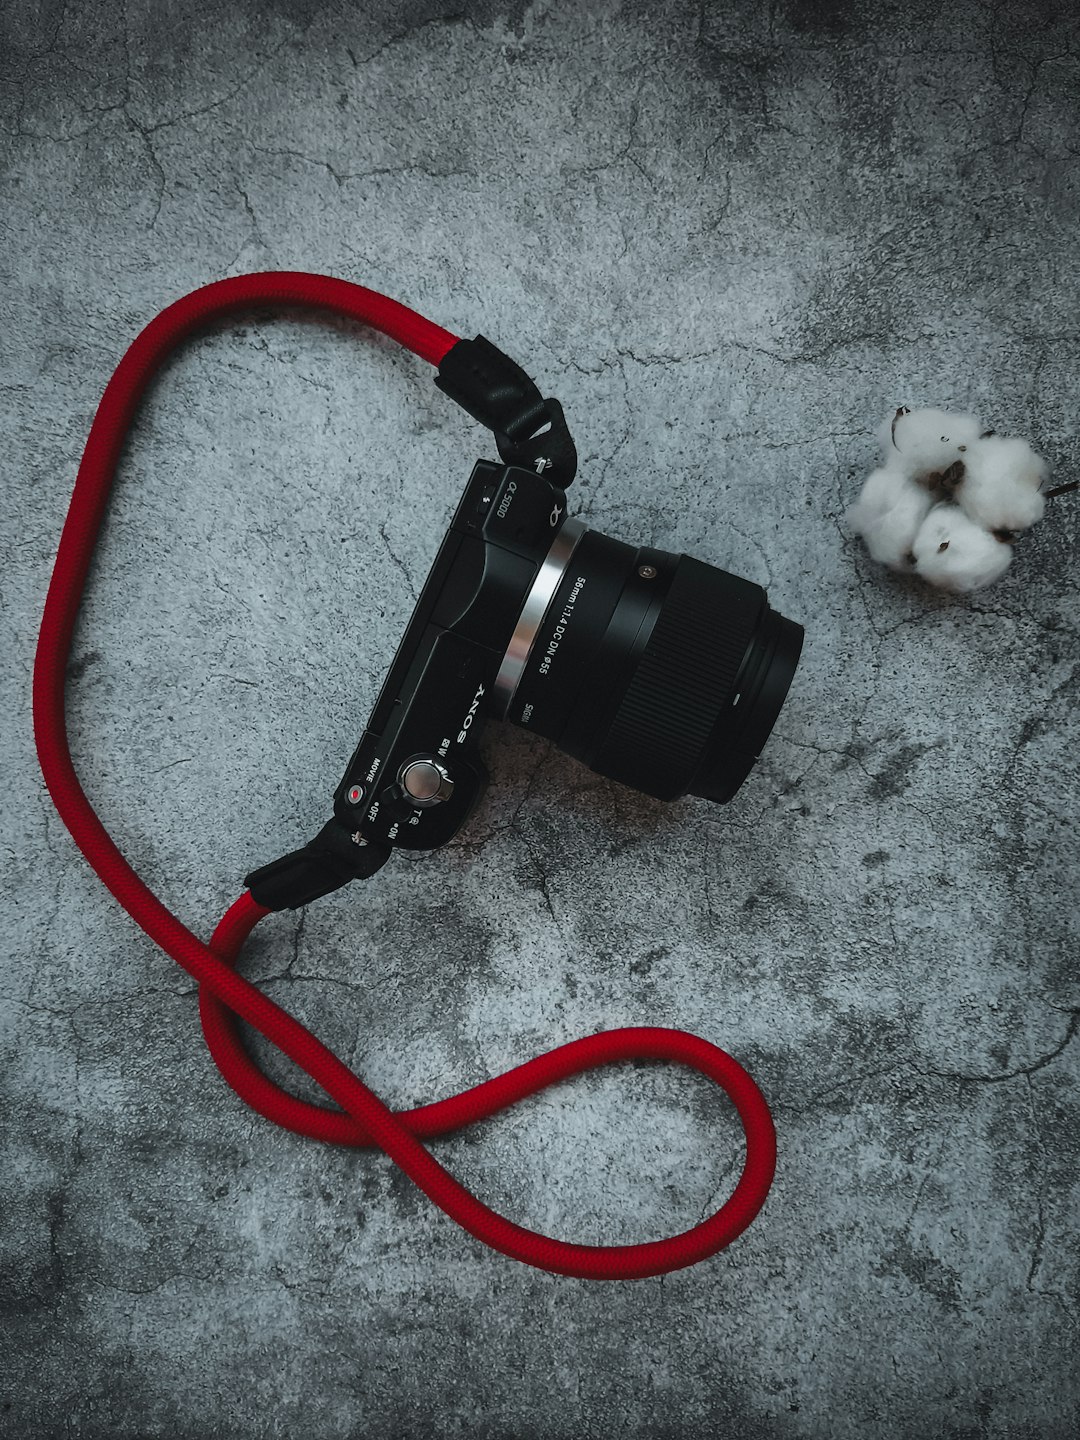 red and black dslr camera on gray textile